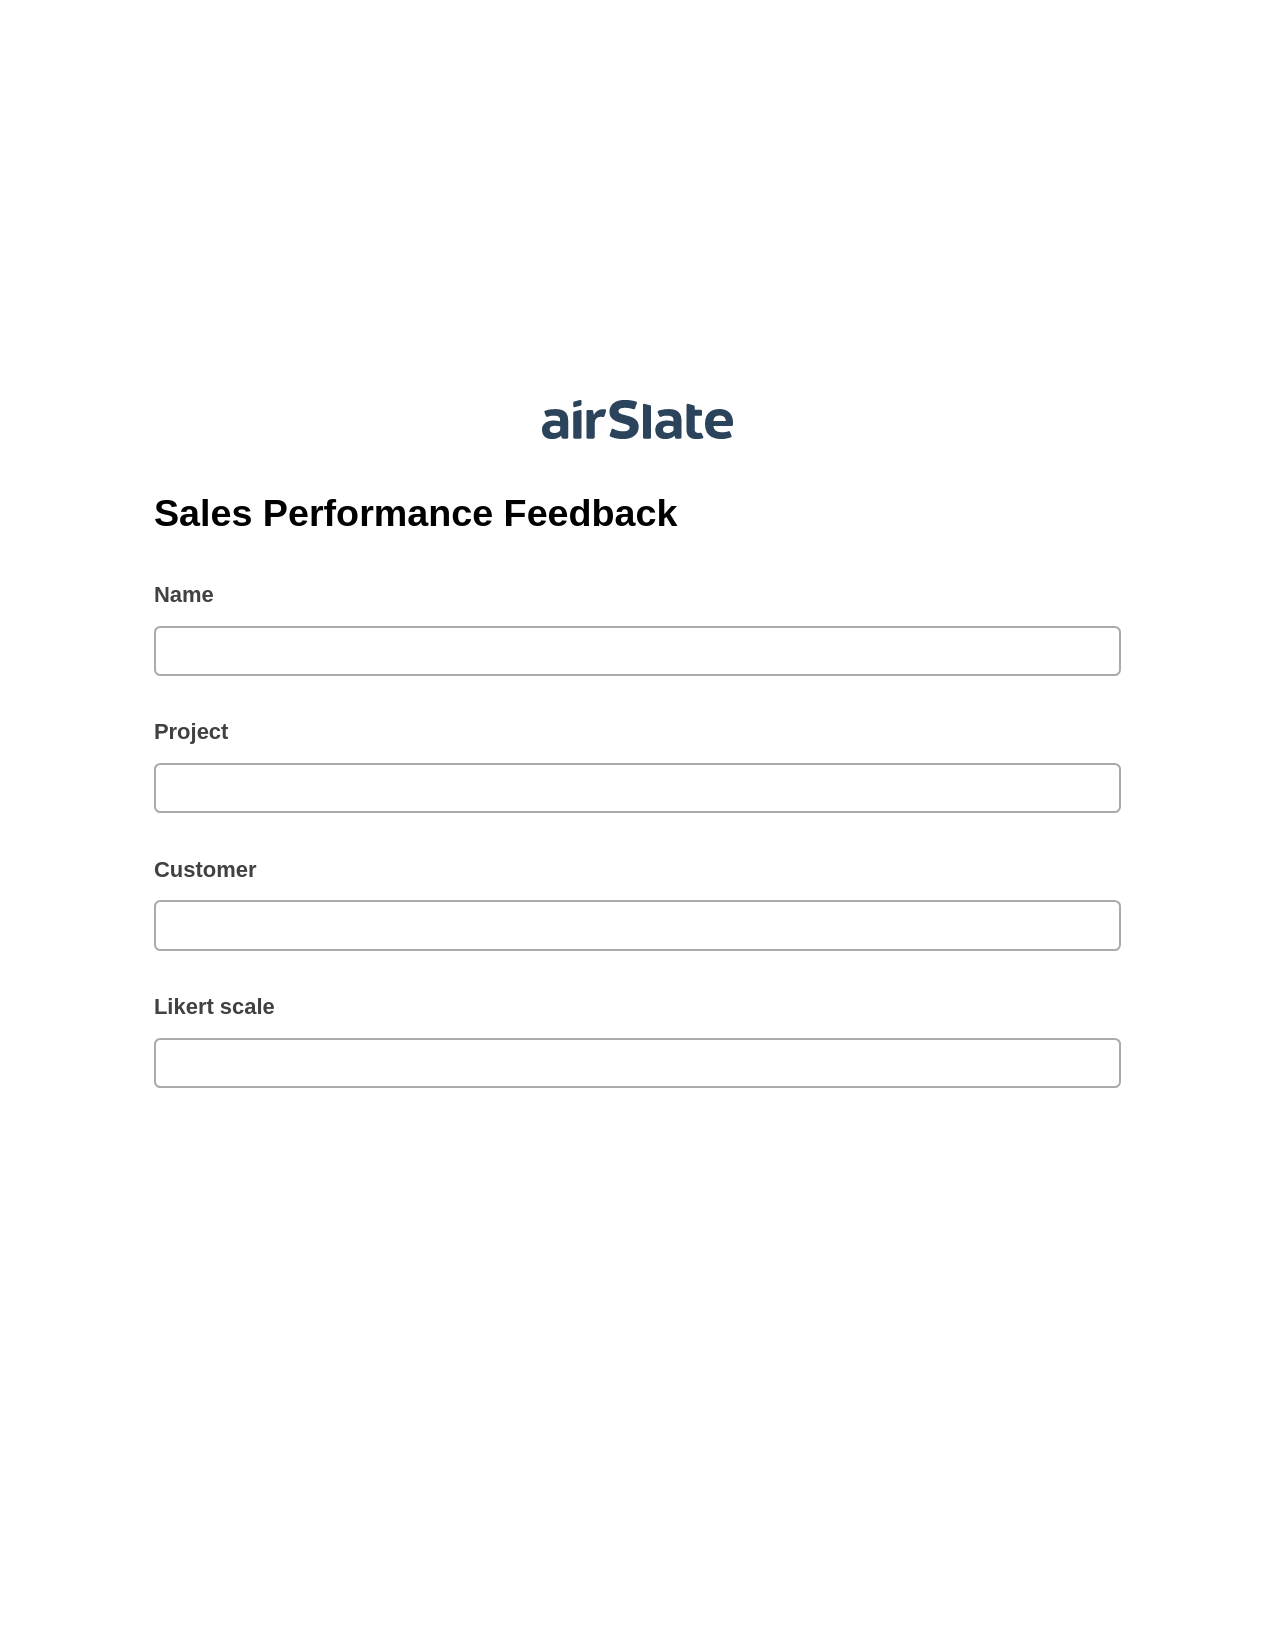 Sales Performance Feedback Pre-fill Slate from MS Dynamics 365 Records Bot, Pre-fill with Custom Data Bot, Archive to SharePoint Folder Bot